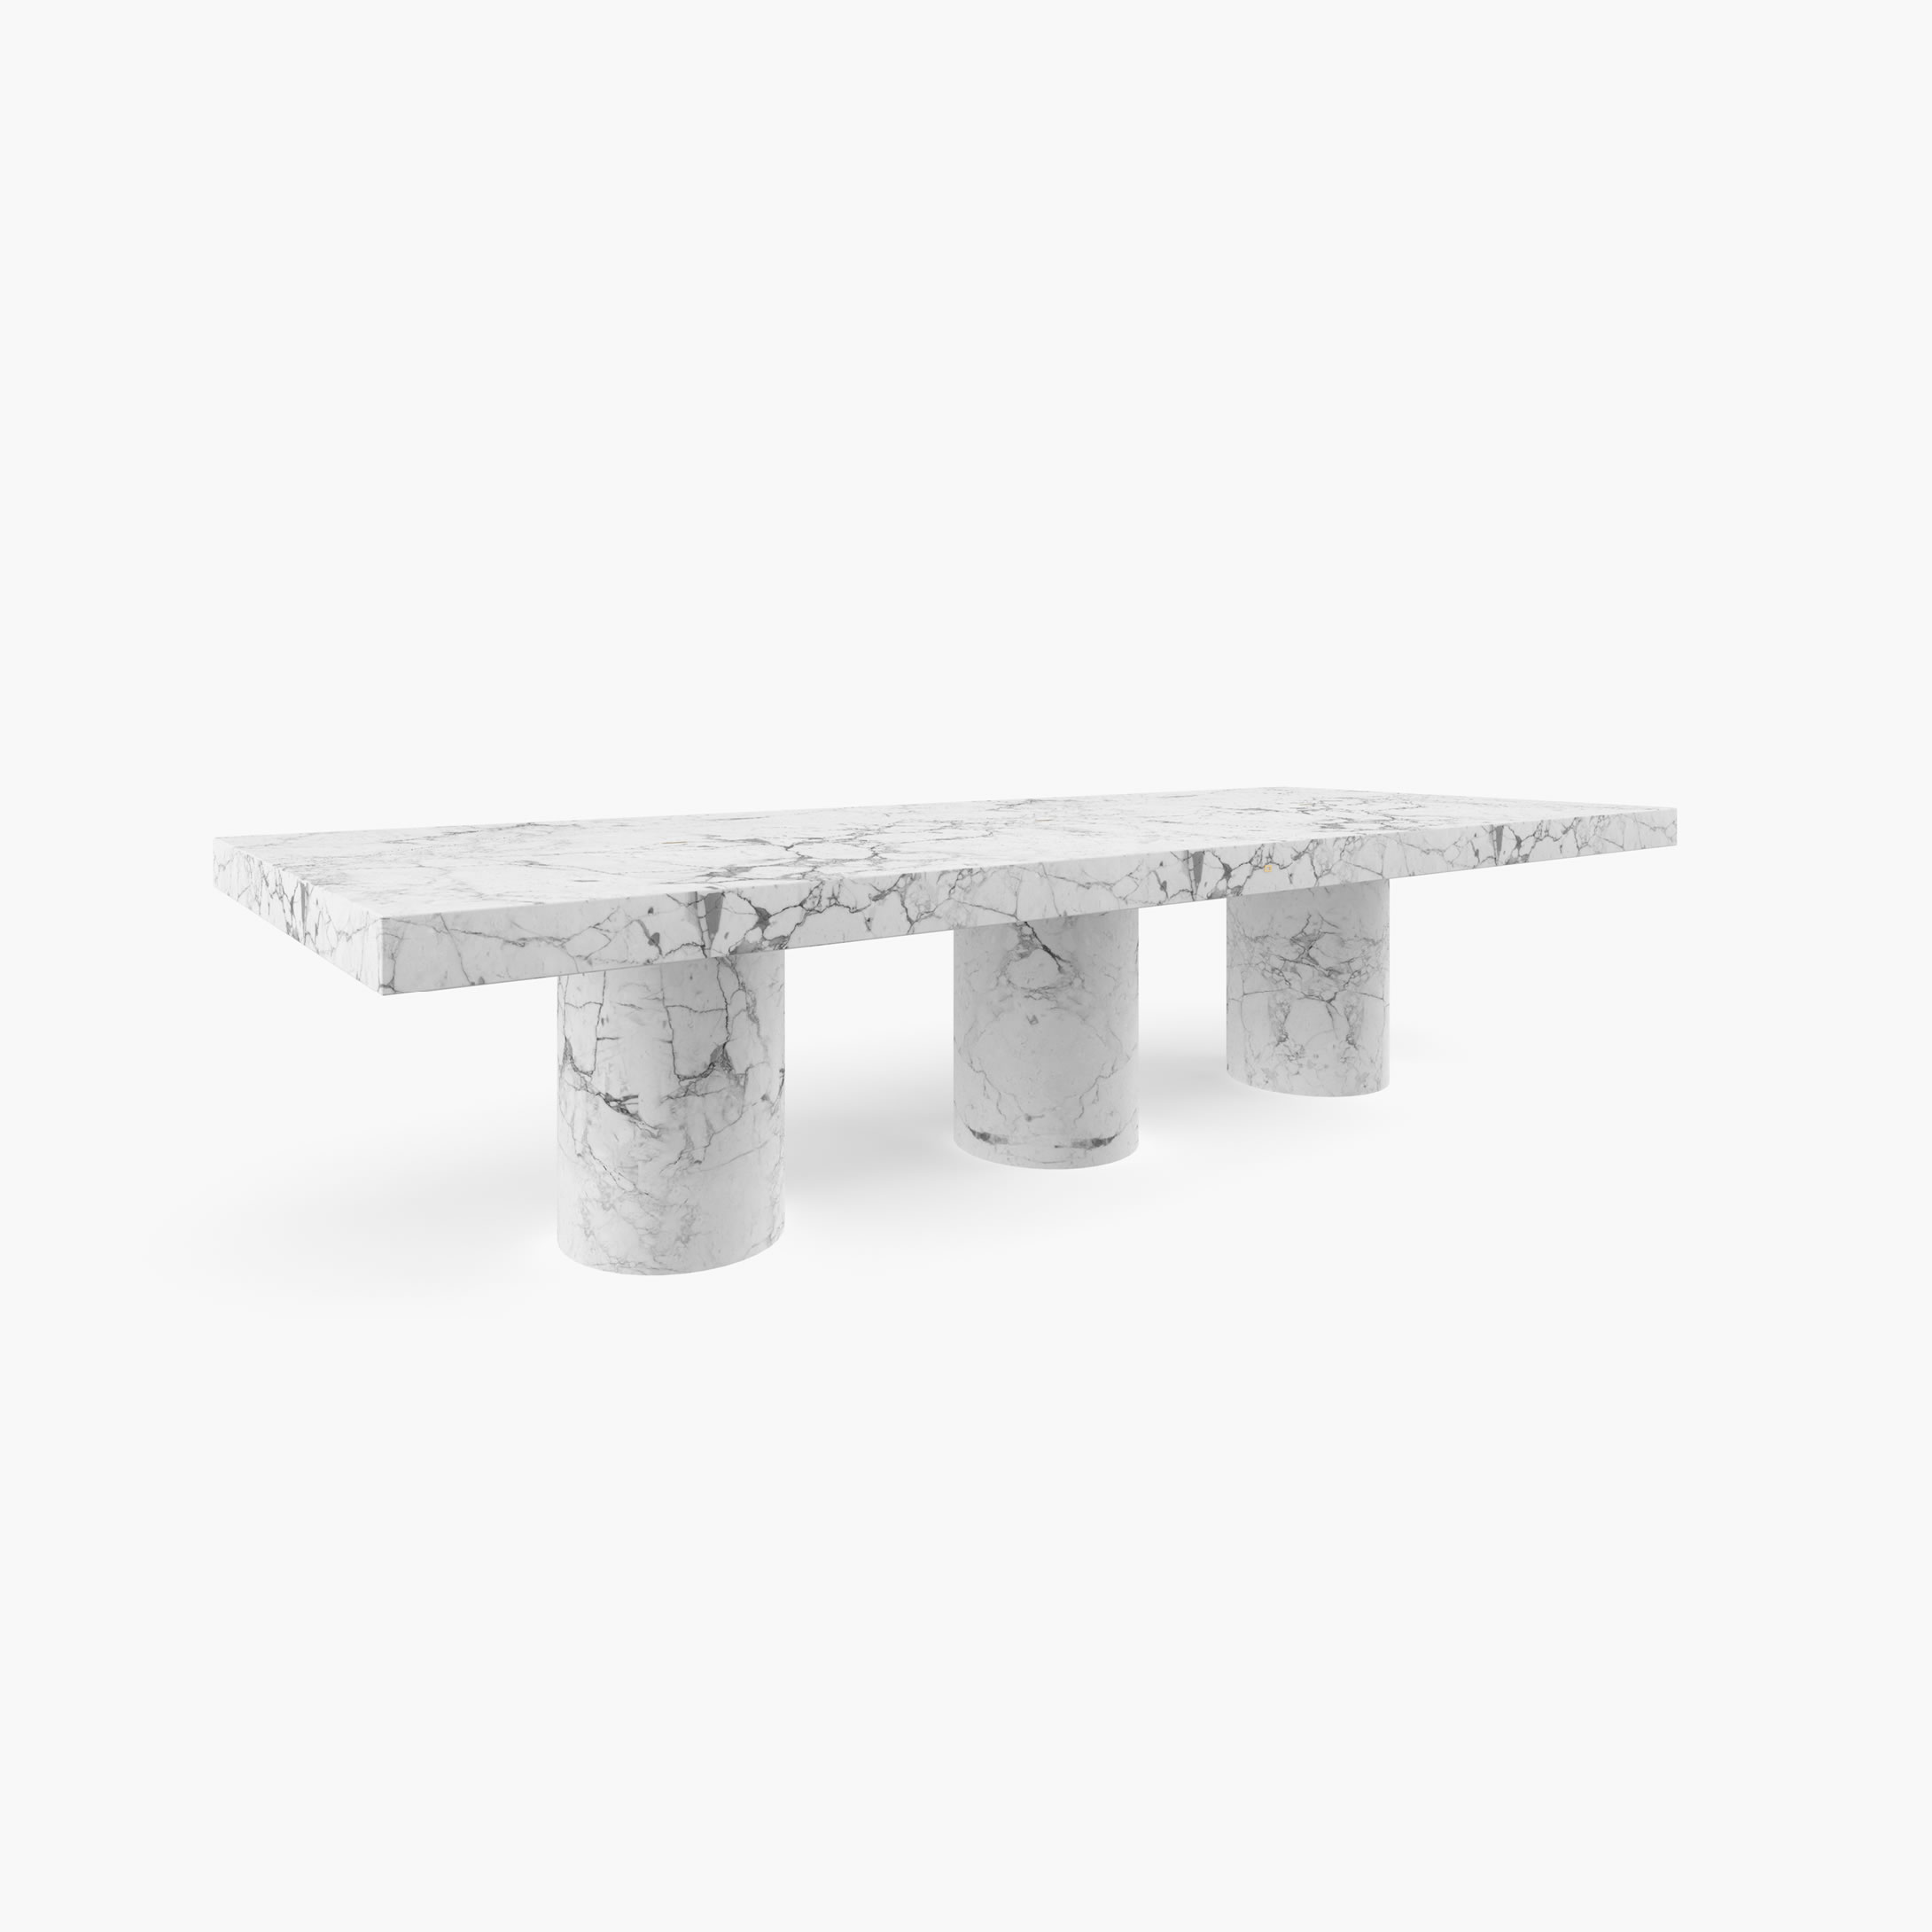 Dining Table Cylinder legs White Arabescato Marble futuristic Dining Room Luxury Dining Tables FS 173 FELIX SCHWAKE